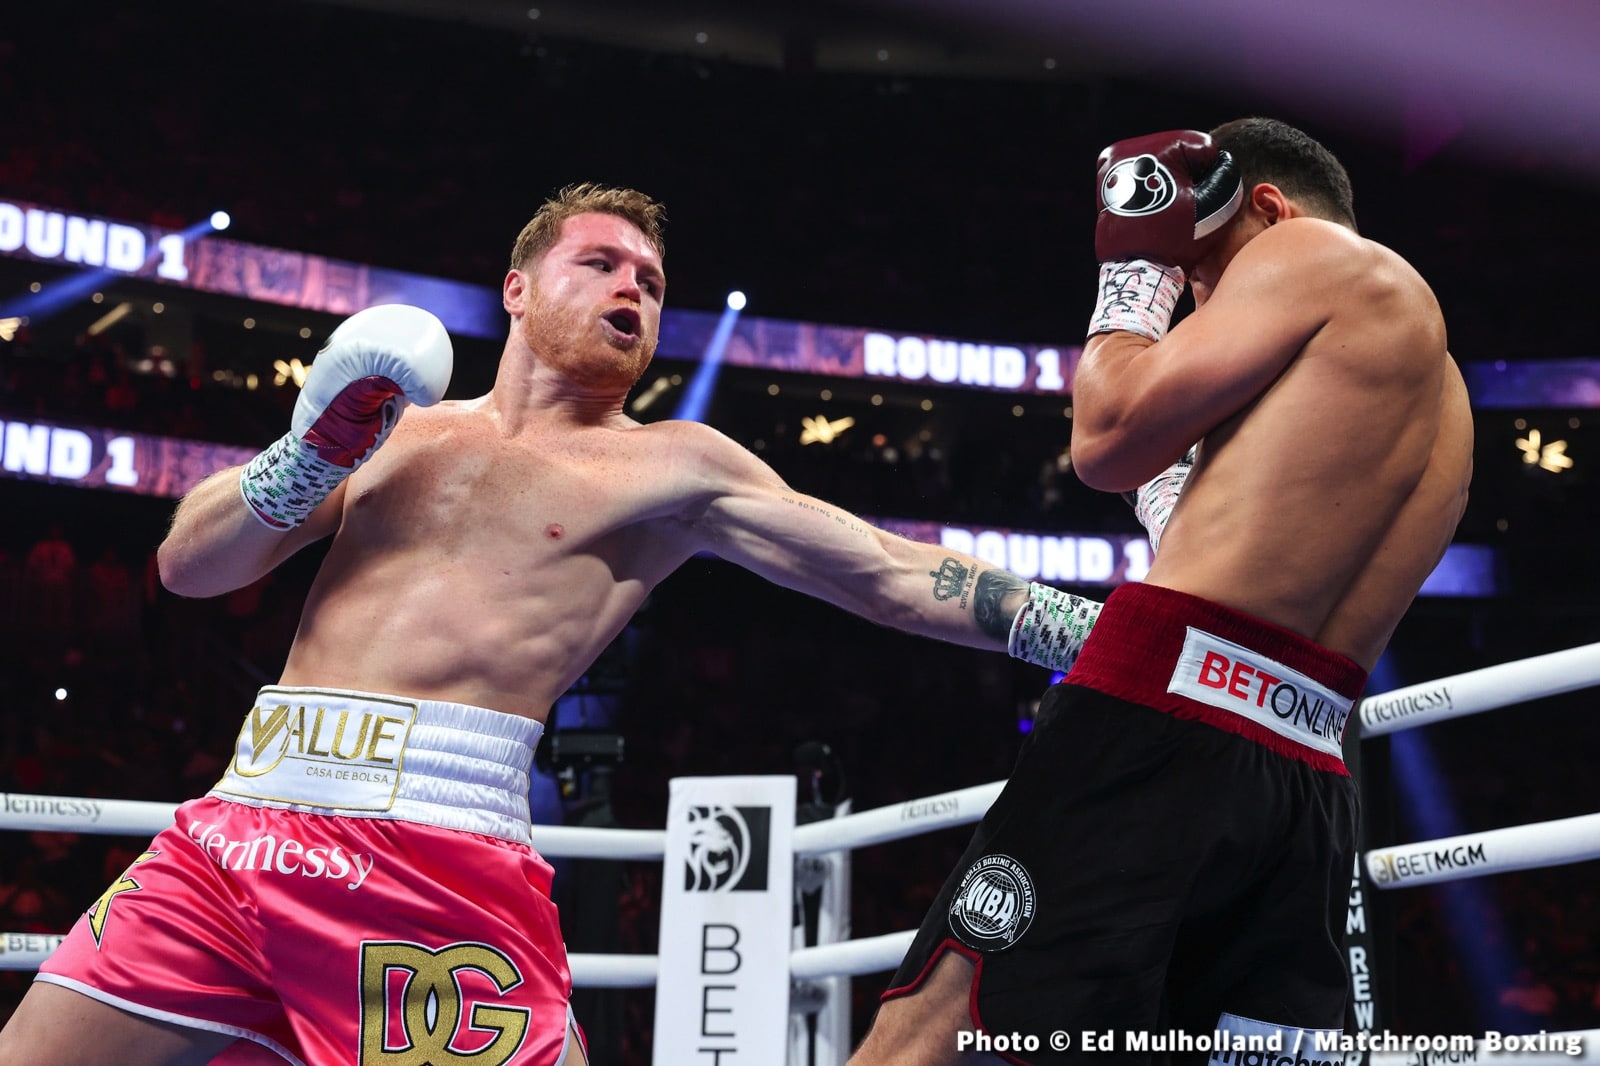 Roberto Duran knows how Canelo can beat Bivol in rematch